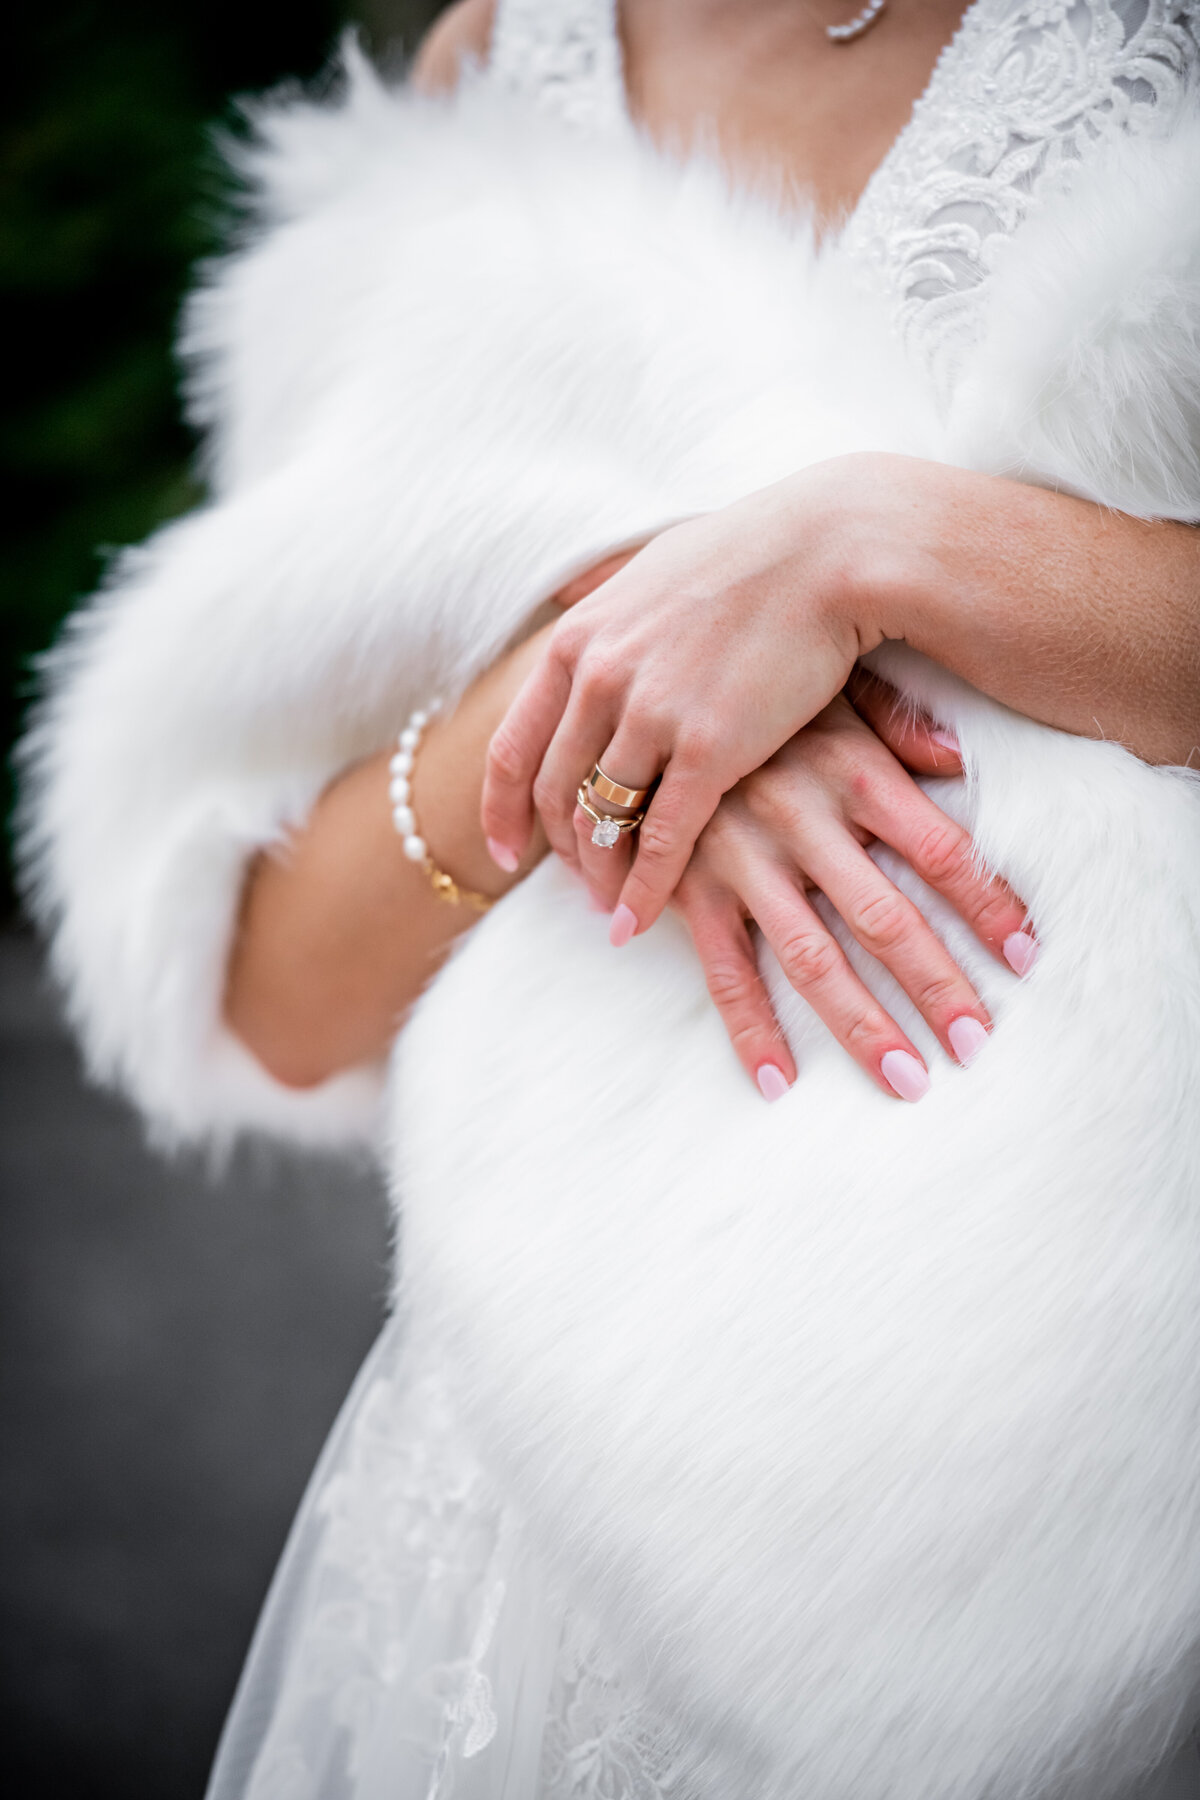 This enchanting bridal portrait captures a serene moment of a bride draped in a luxurious fur wrap, showcasing her sparkling wedding ring. Set against a softly blurred background that accentuates the crisp, wintry atmosphere, the image highlights the intricate details of the ring and the rich texture of the fur, blending classic elegance with a touch of modern sophistication. Ideal for couples seeking inspiration for a winter wedding, this photo beautifully conveys the warmth and romance of a cold-weather celebration.